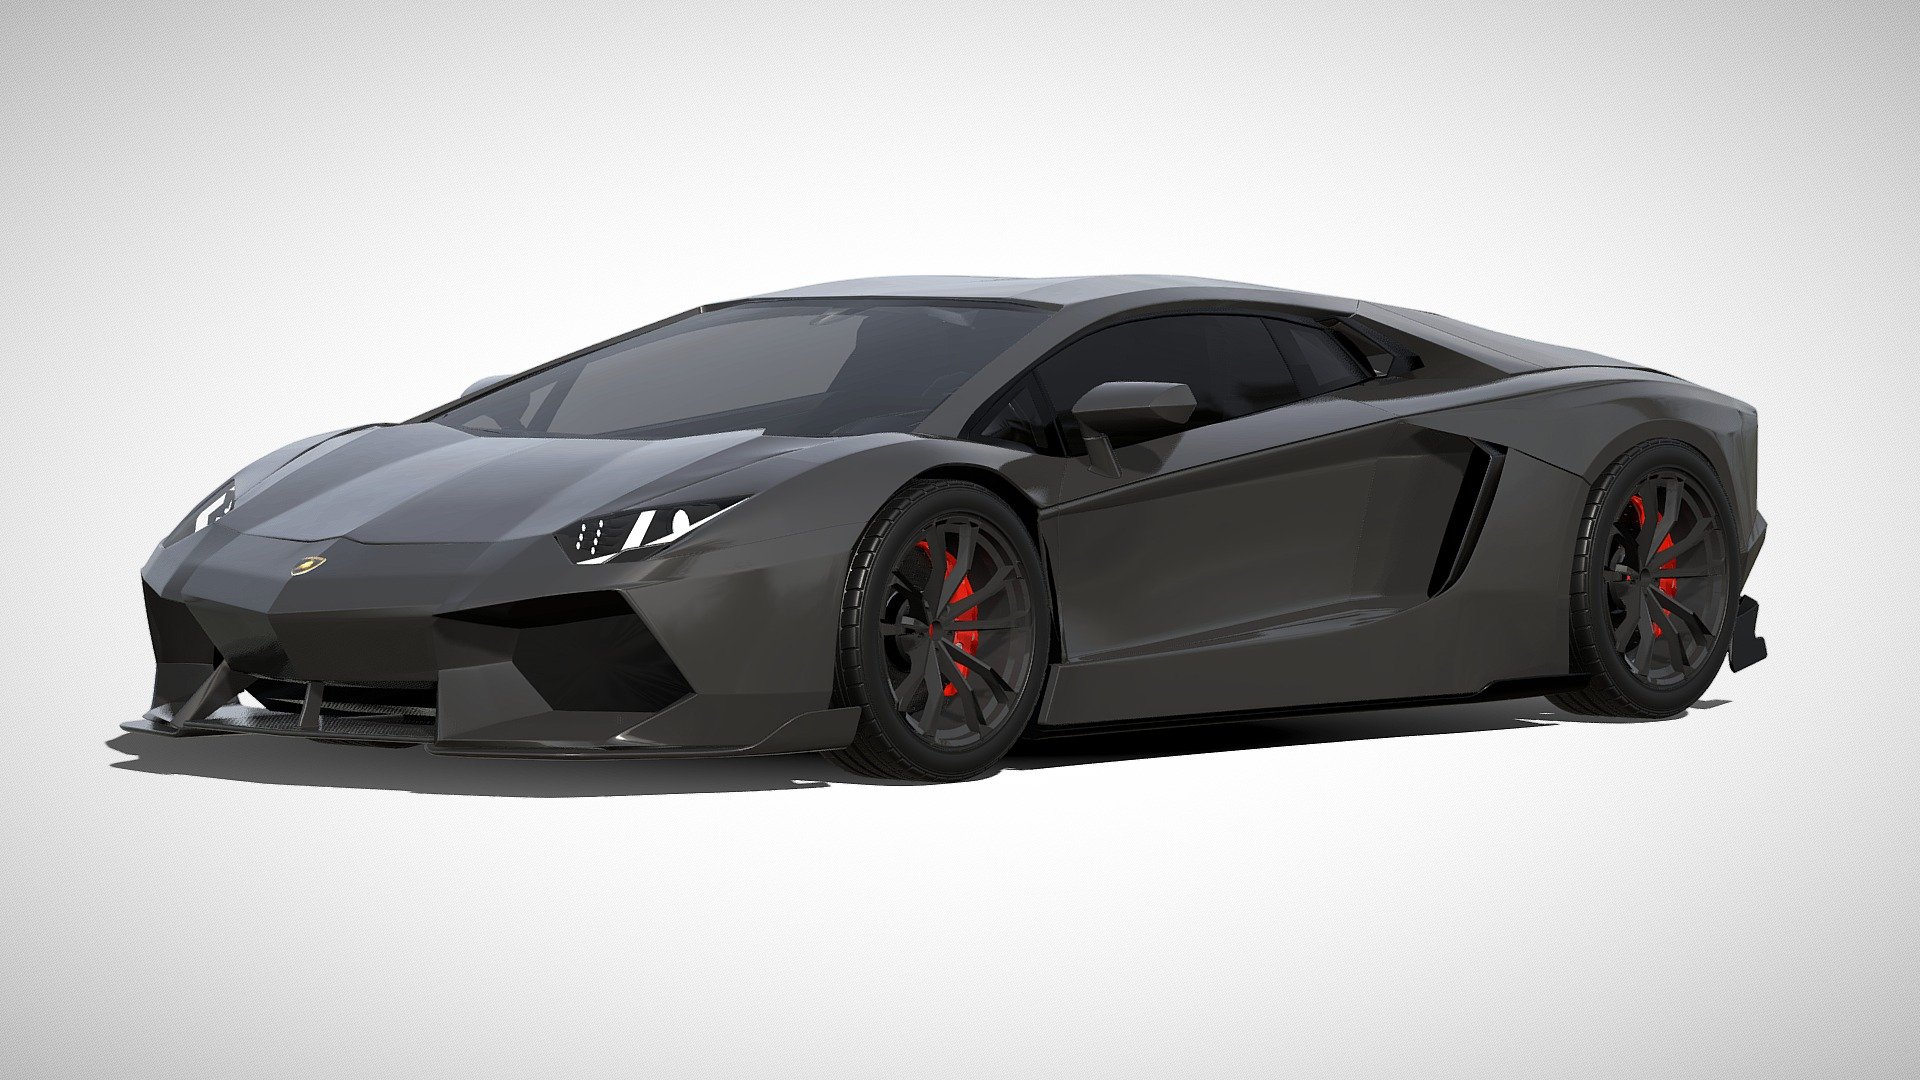 A highly detailed 3D model of the Lamborghini Aventador created by HDM Studios team

Textures:
- All textures were included in this file, but you can also use the glb file - it is in this type of file that textures are attached to the model.

About 3D model:


Highly detailed car model.
Animated model (Blend.file)
PBR textures (Key Shot)
Highly detailed interior of the car
Suitable for use in games

Thank you for purchasing our models! - Lamborghini Aventador - Buy Royalty Free 3D model by HDM Studios (@HDM.Studios) 3d model